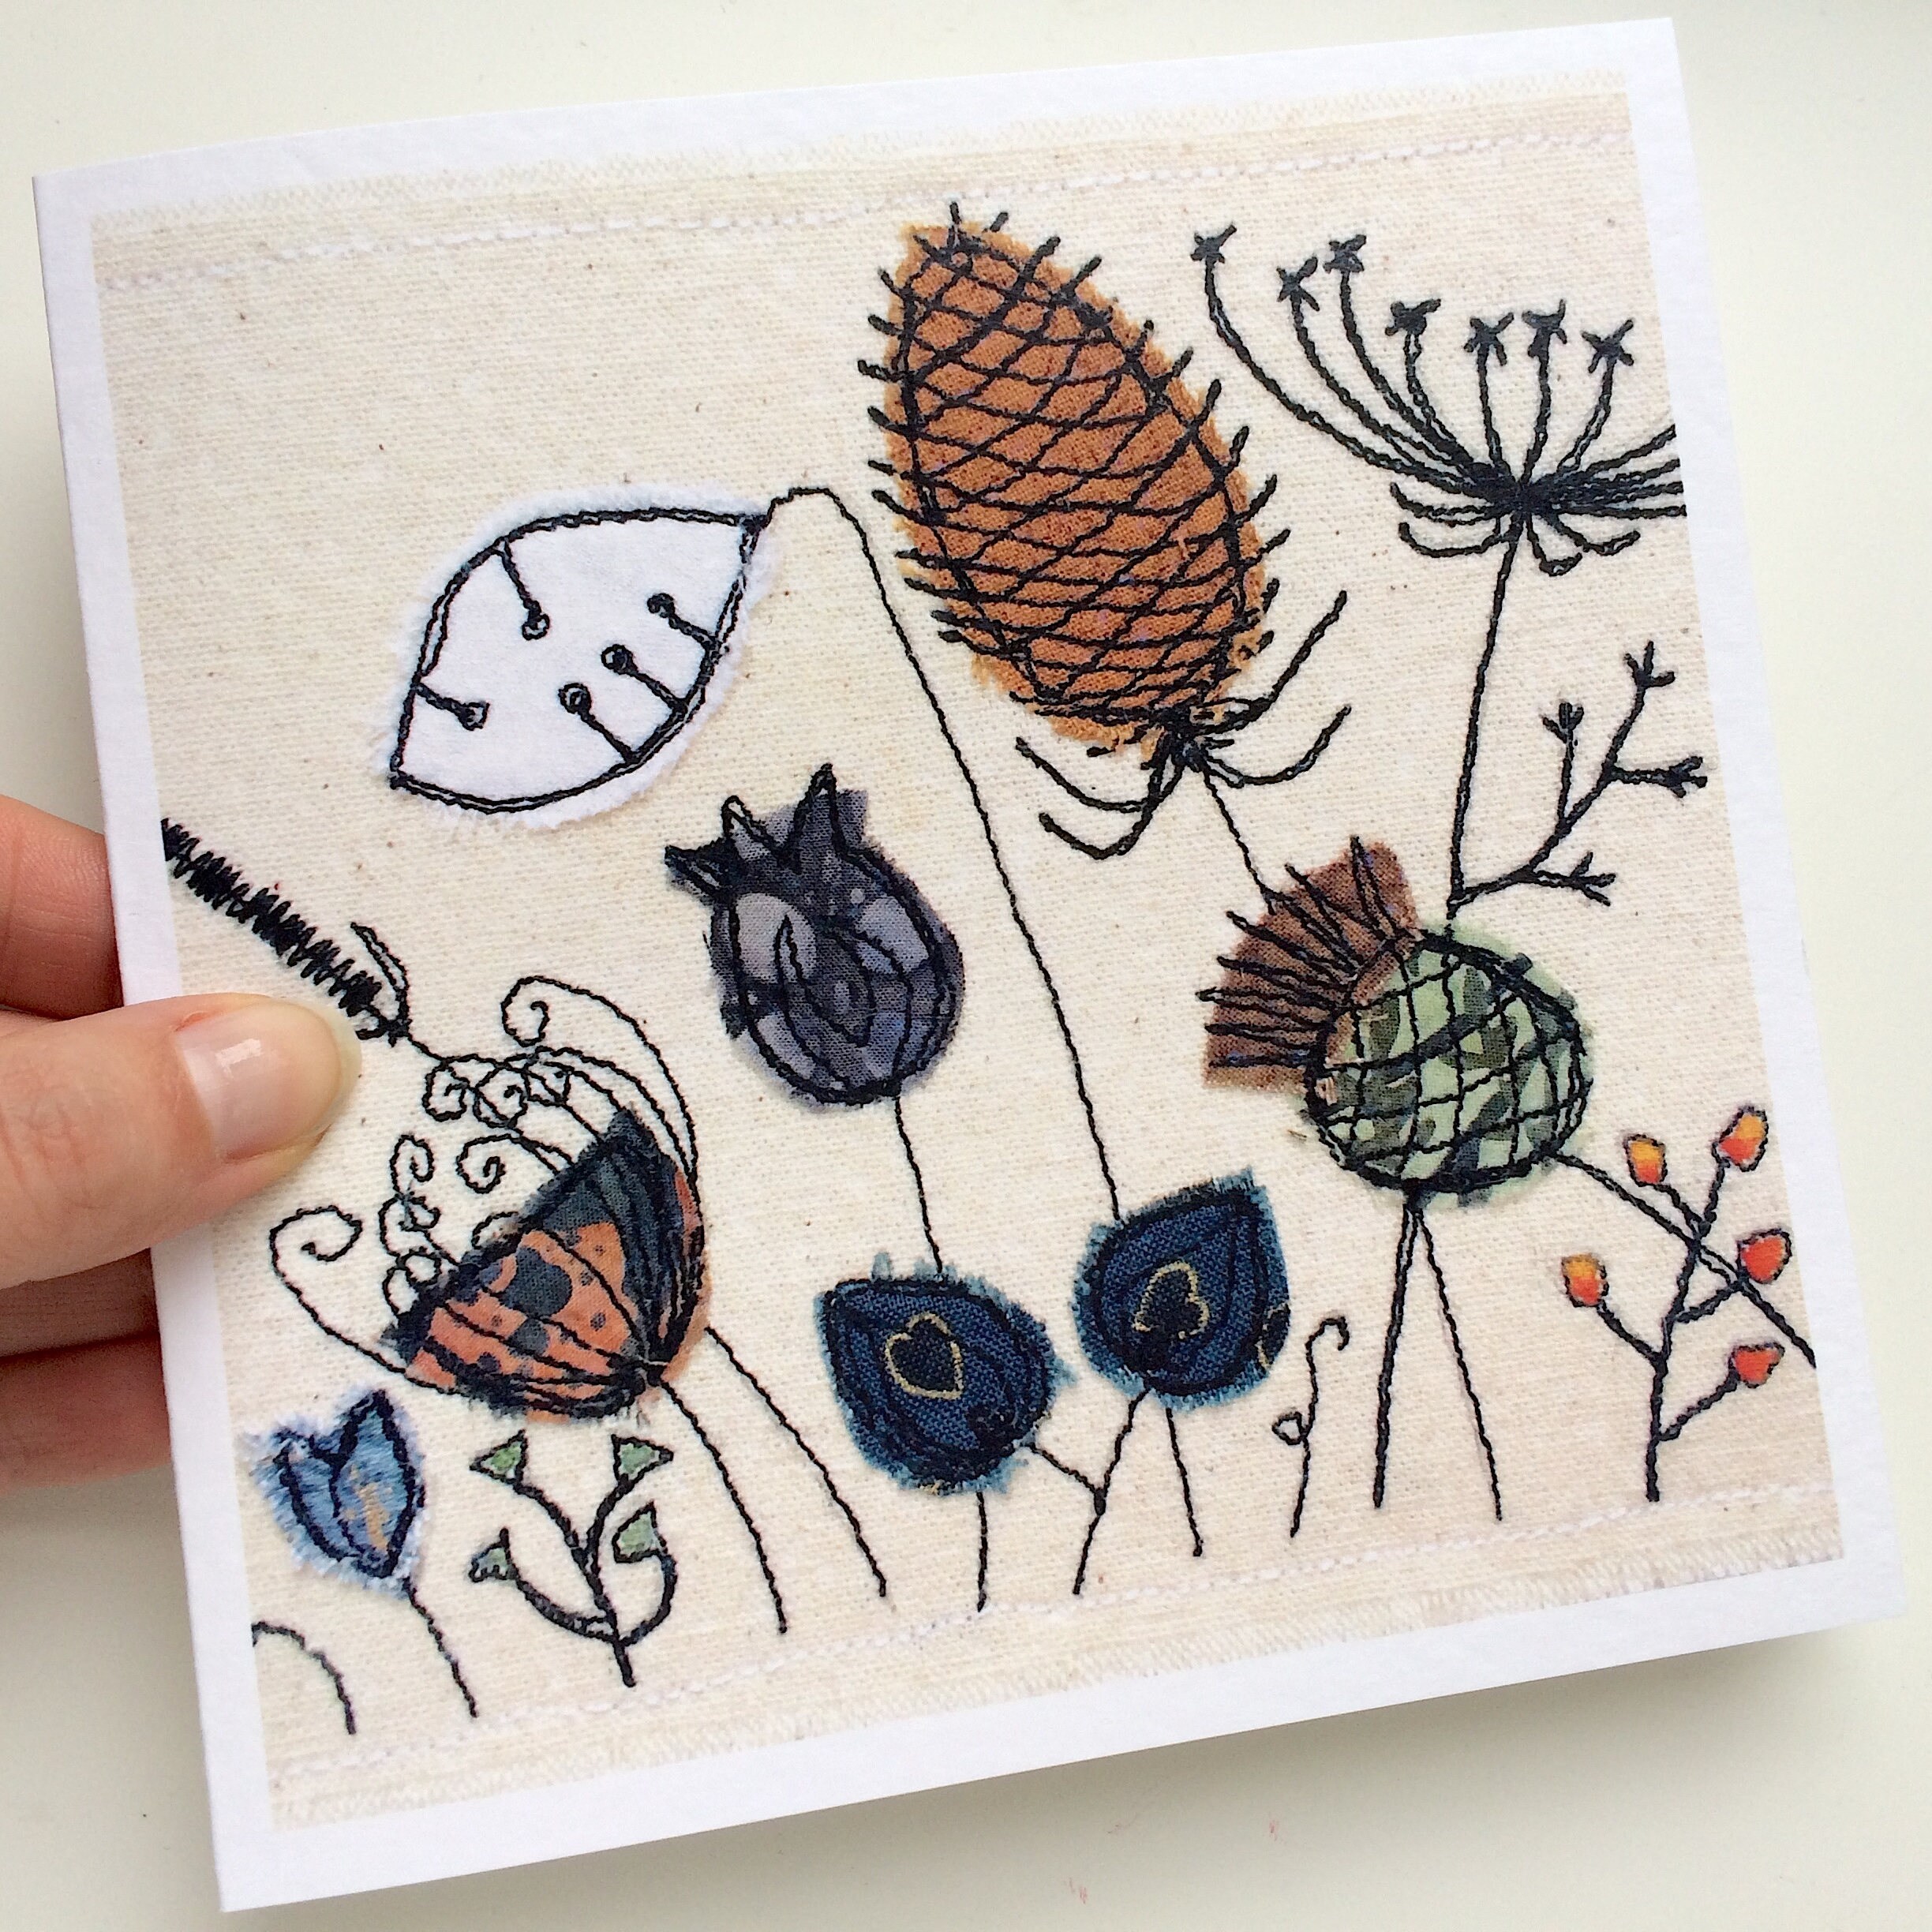 Seed Heads greeting card printed from an original textile art | Etsy